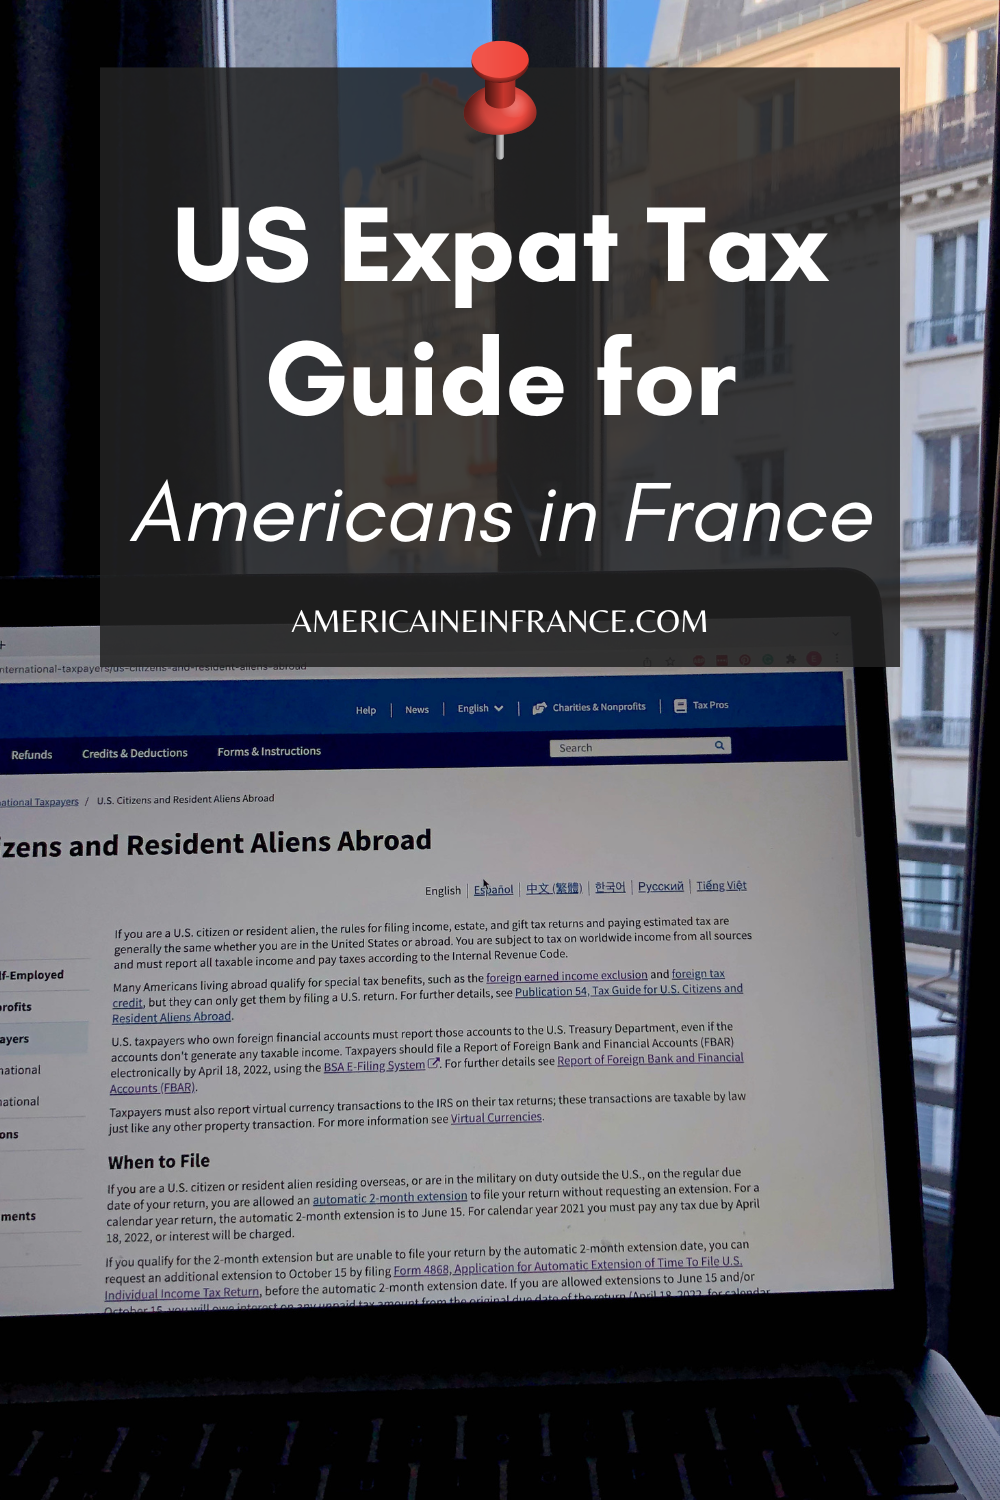 US Expat Taxes: What Americans Living in France Need to Know